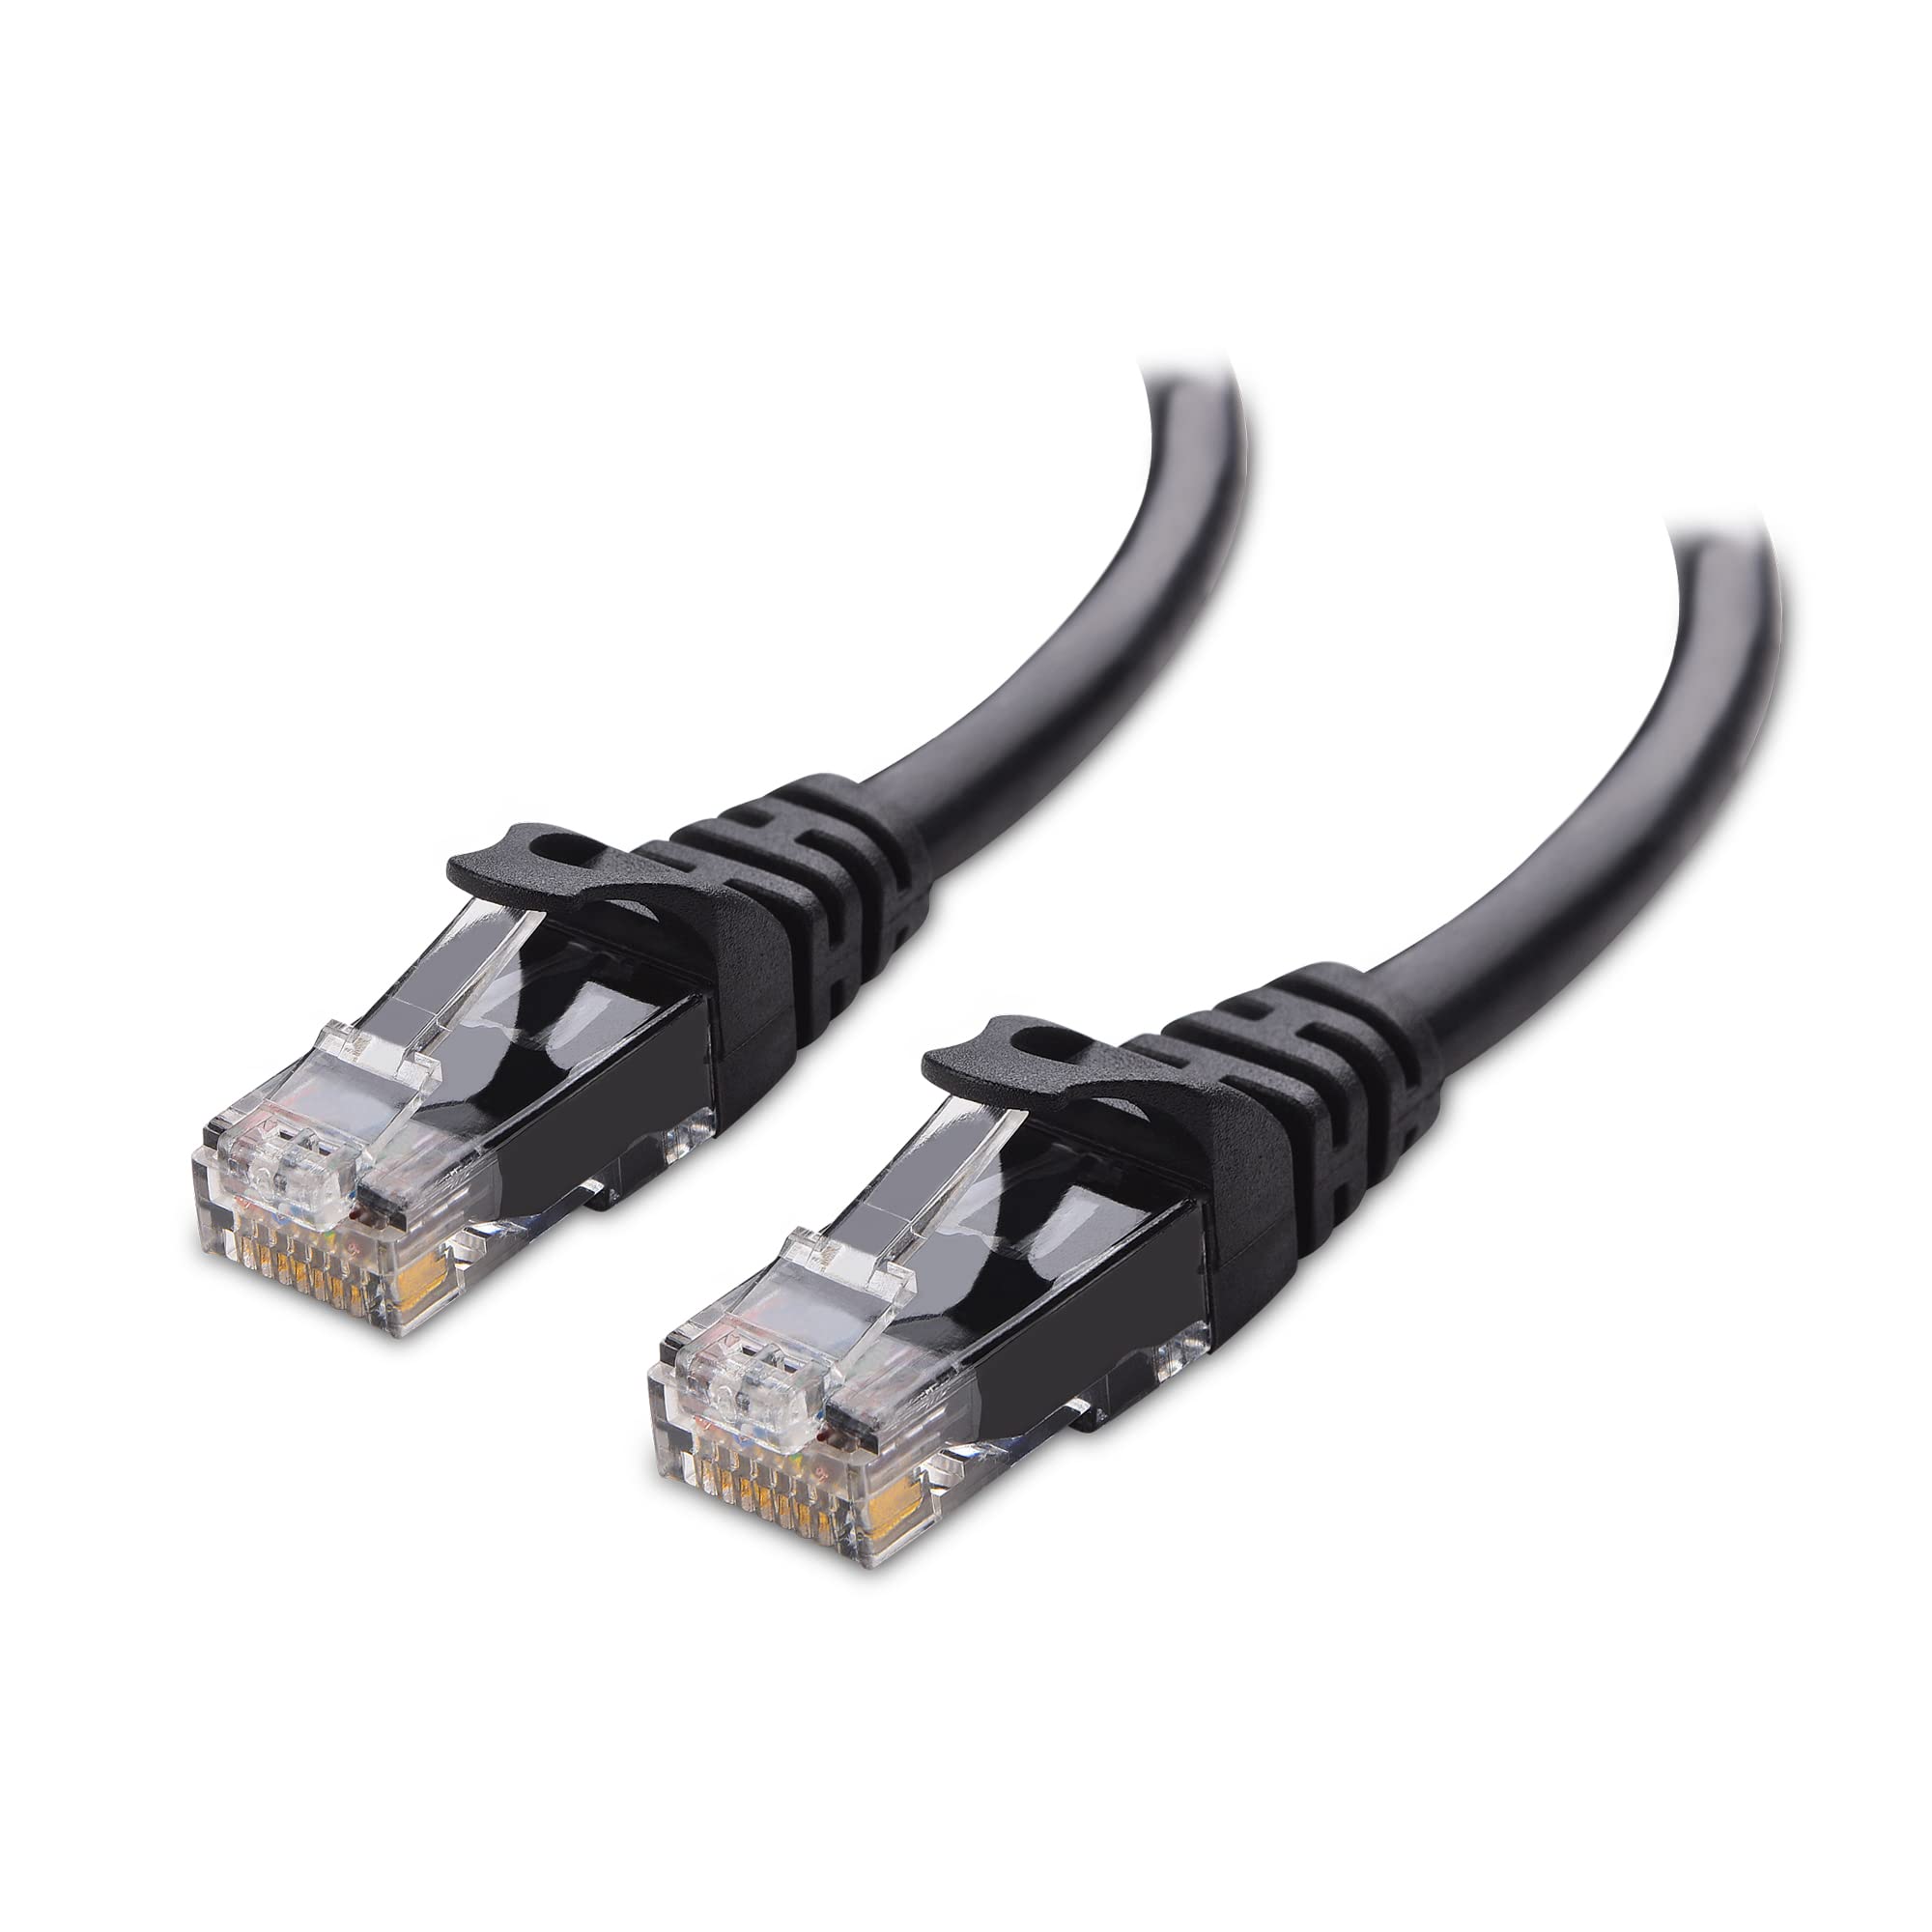 Network cable or ethernet cable